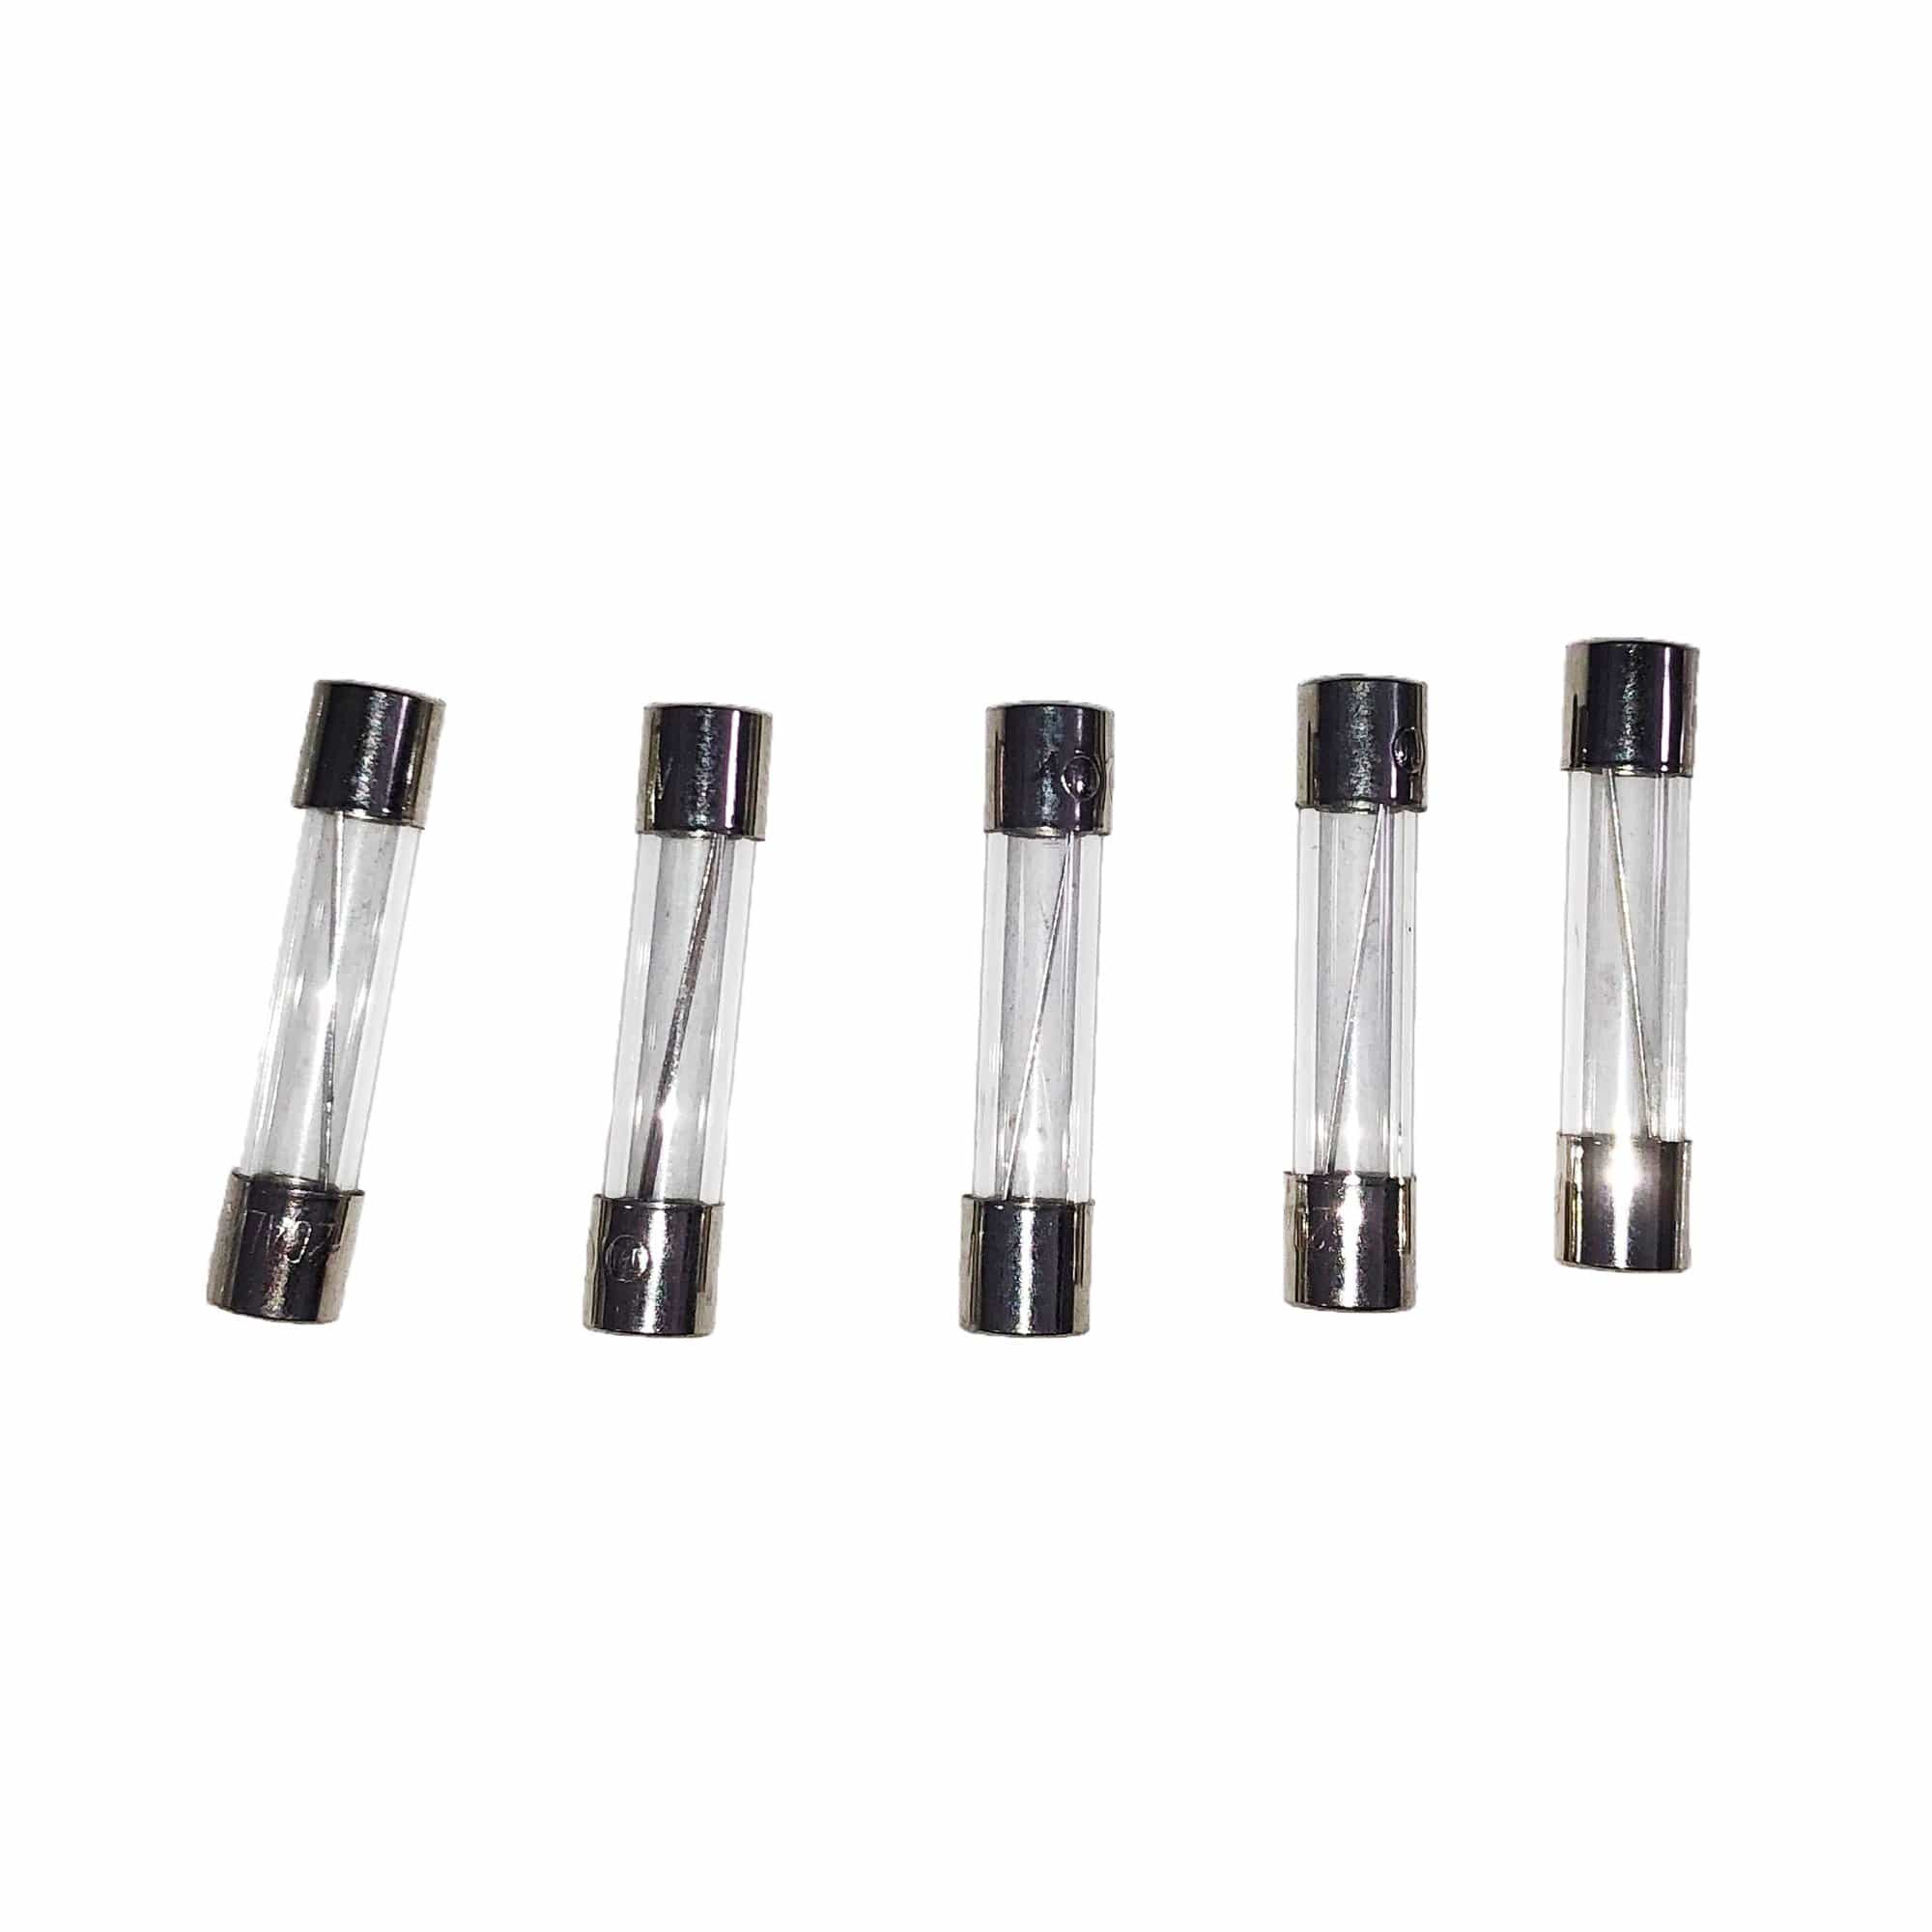 PowerBright F1A 1 Amp Glass Fuse 5 Pack